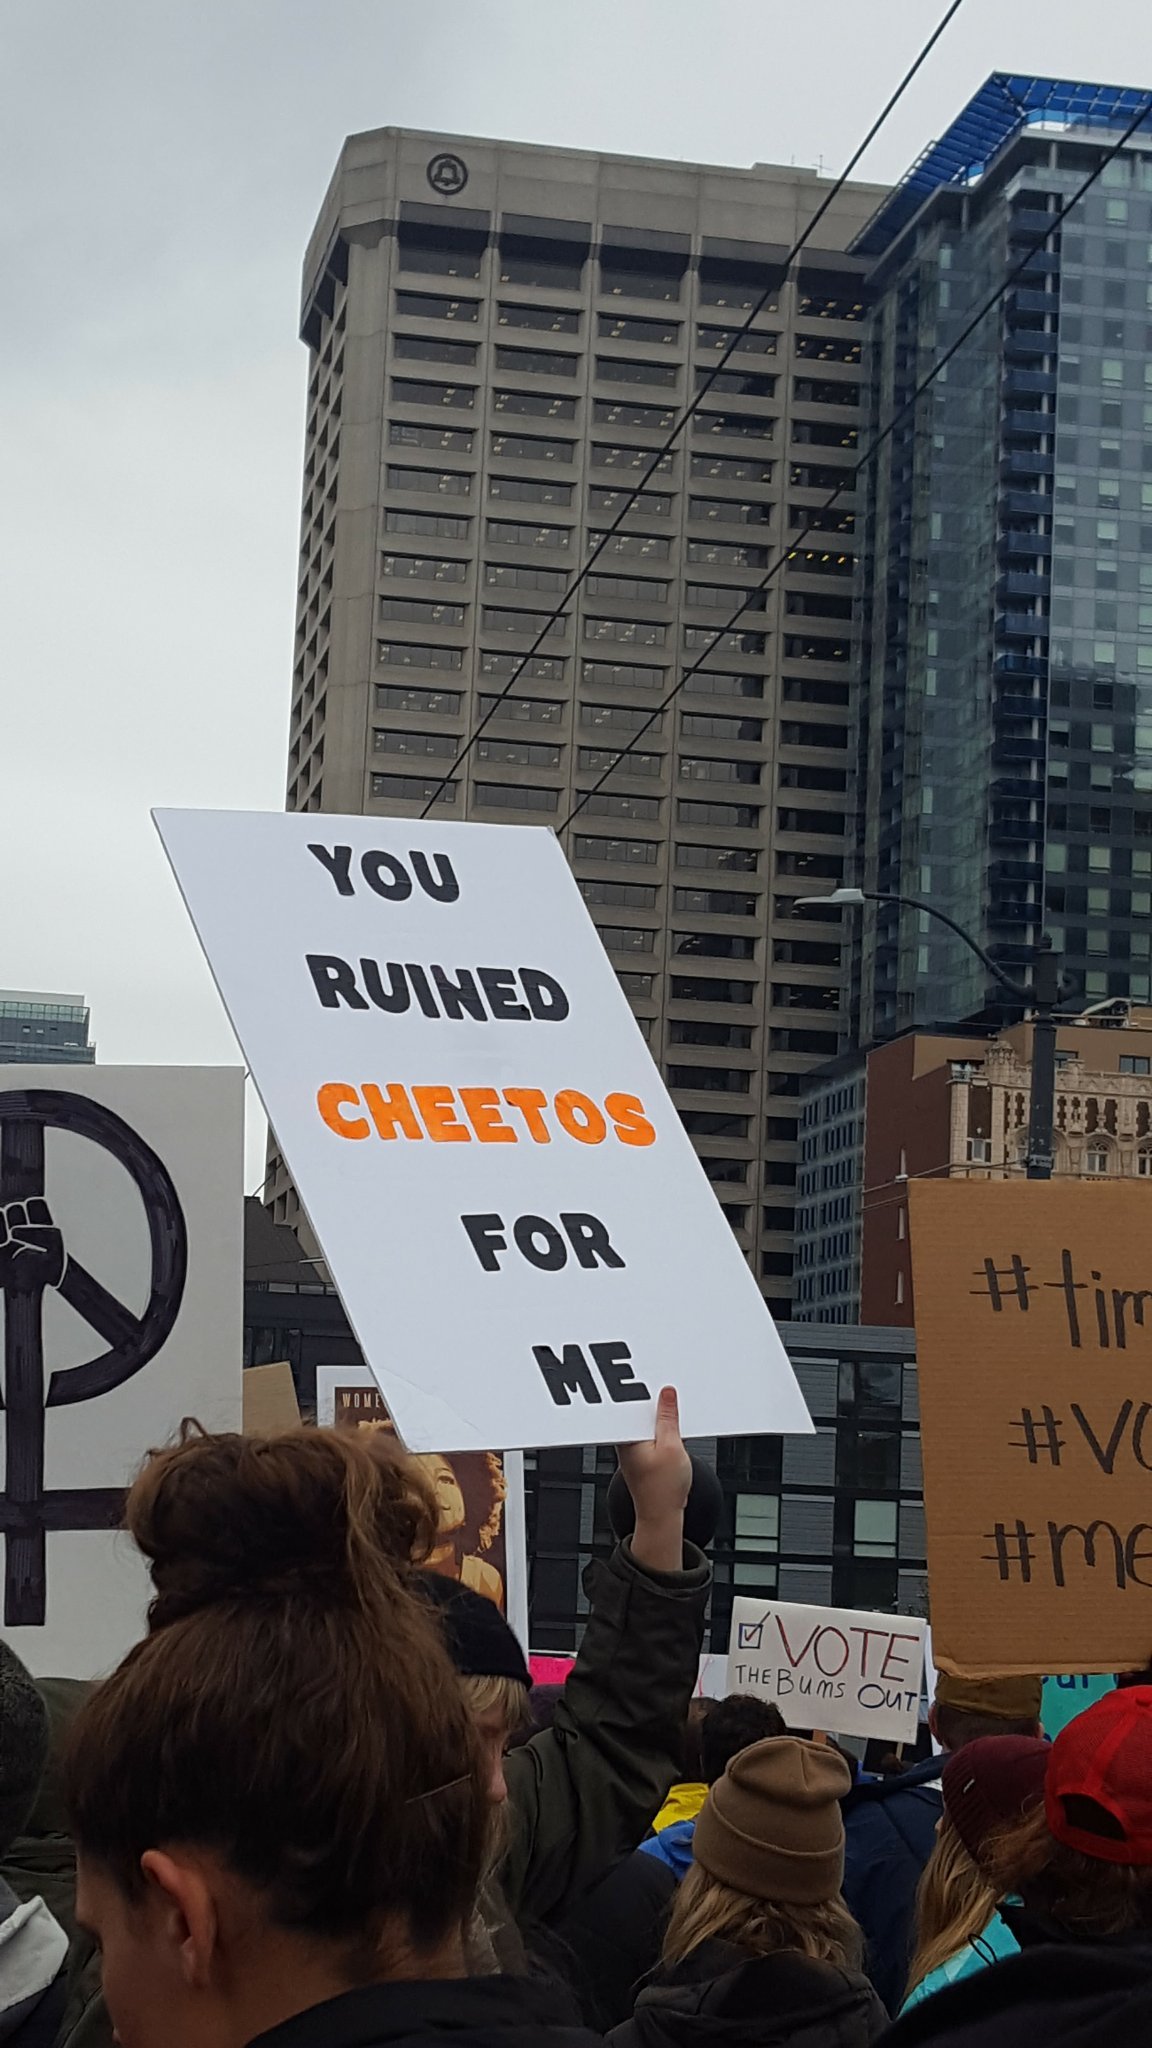 Friend was at a women's march and saw this - meme